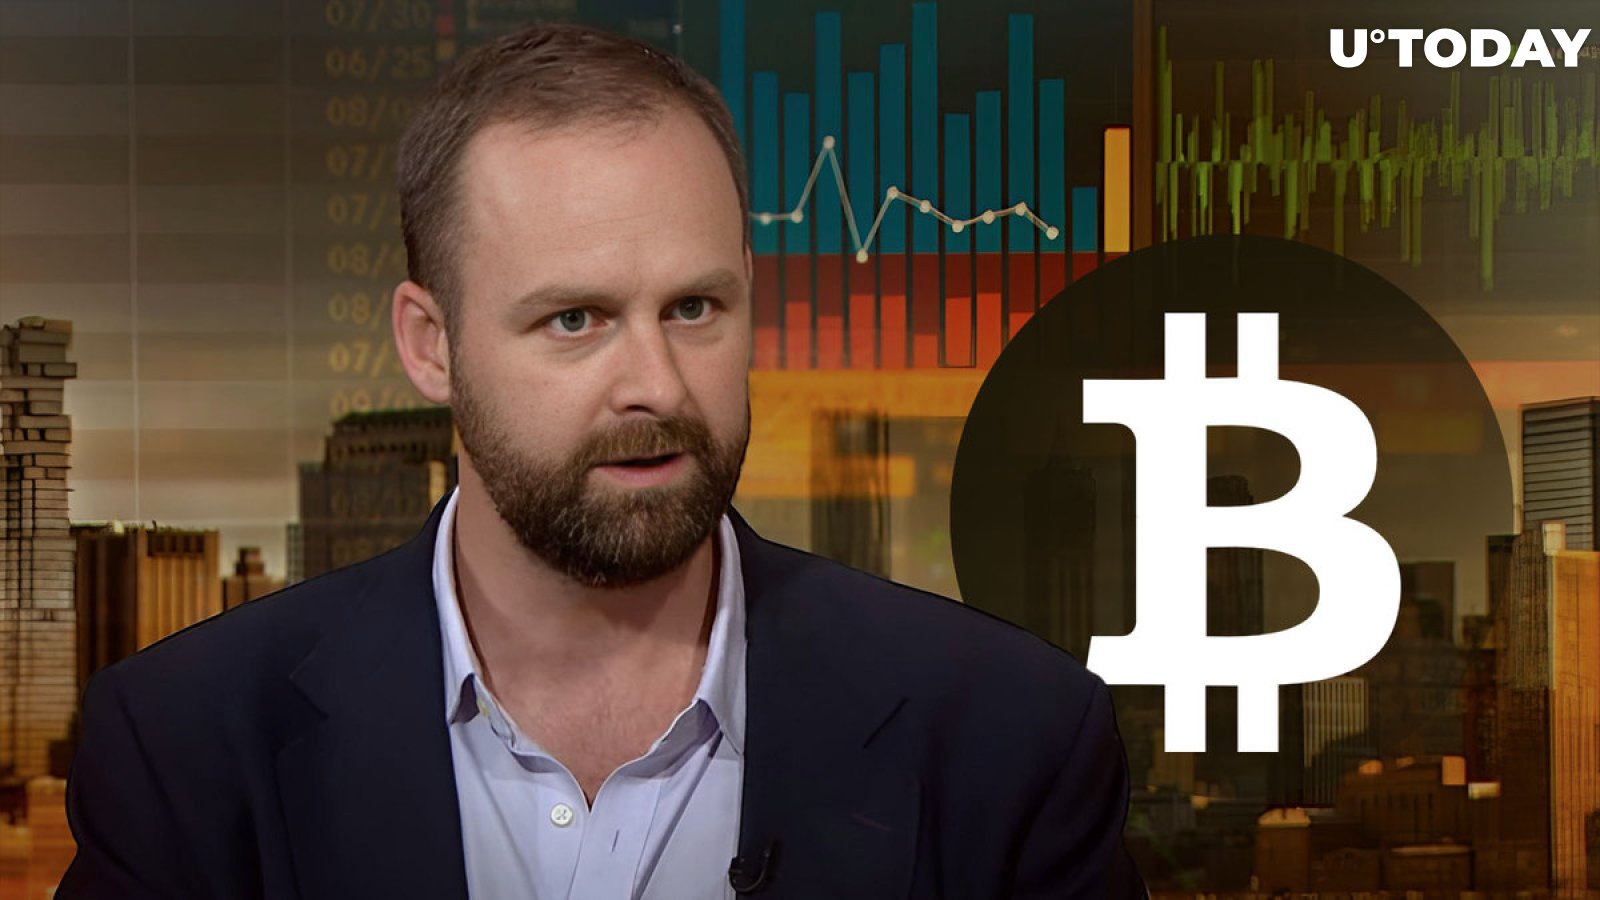 Messari CEO Predicts $100K Price Target for Bitcoin in 12 Months, Here's His Rationale